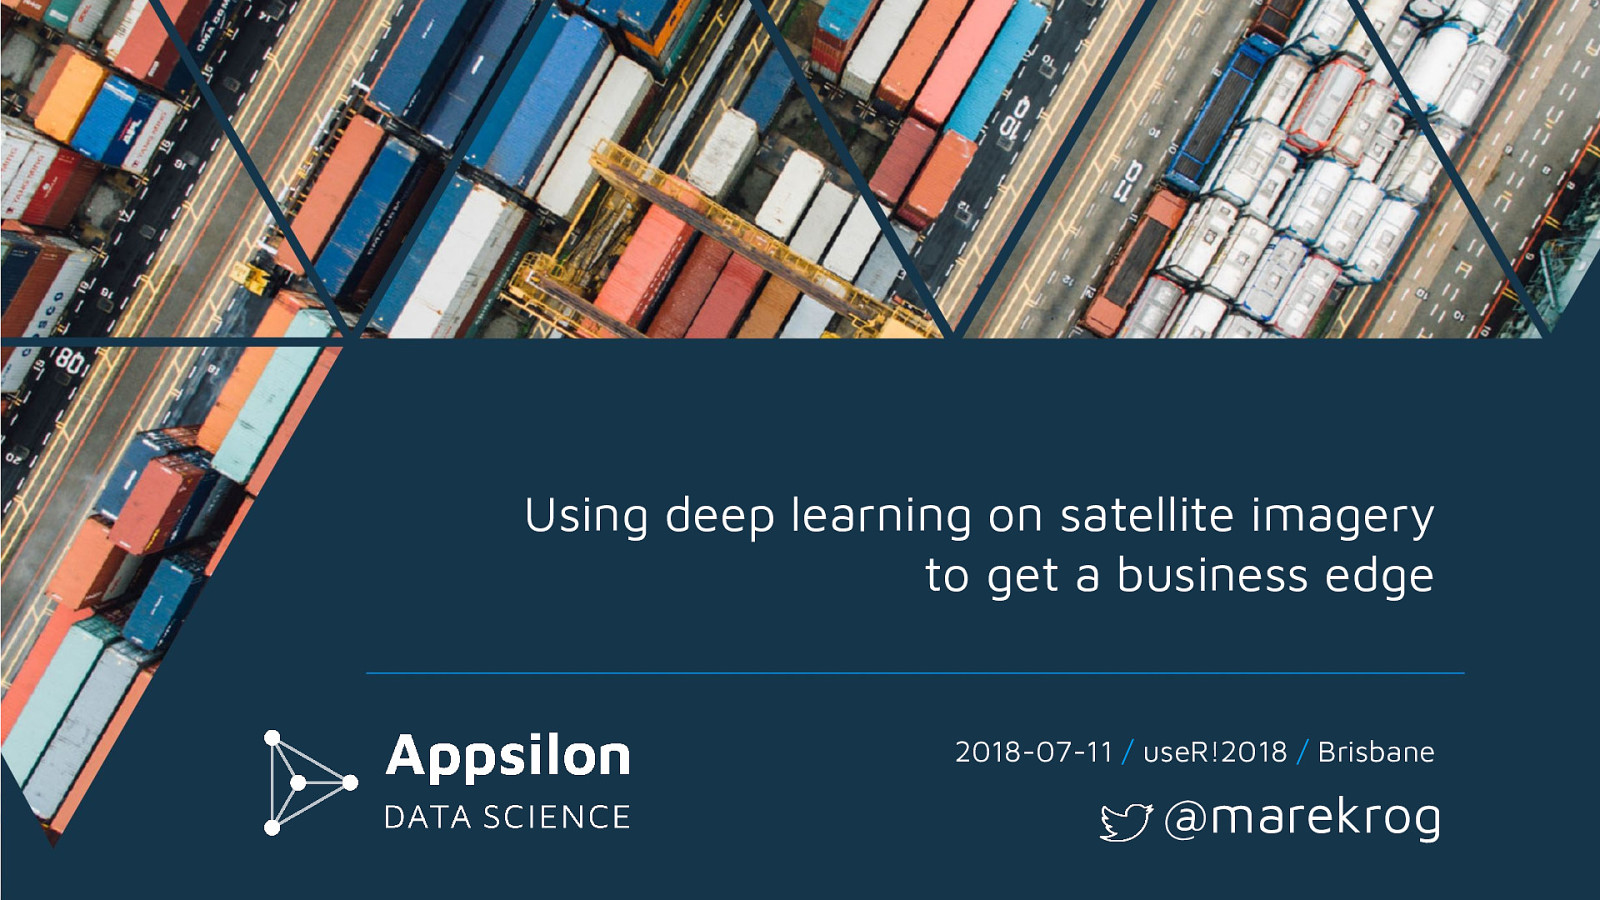 Using deep learning on satellite imagery to get a business edge